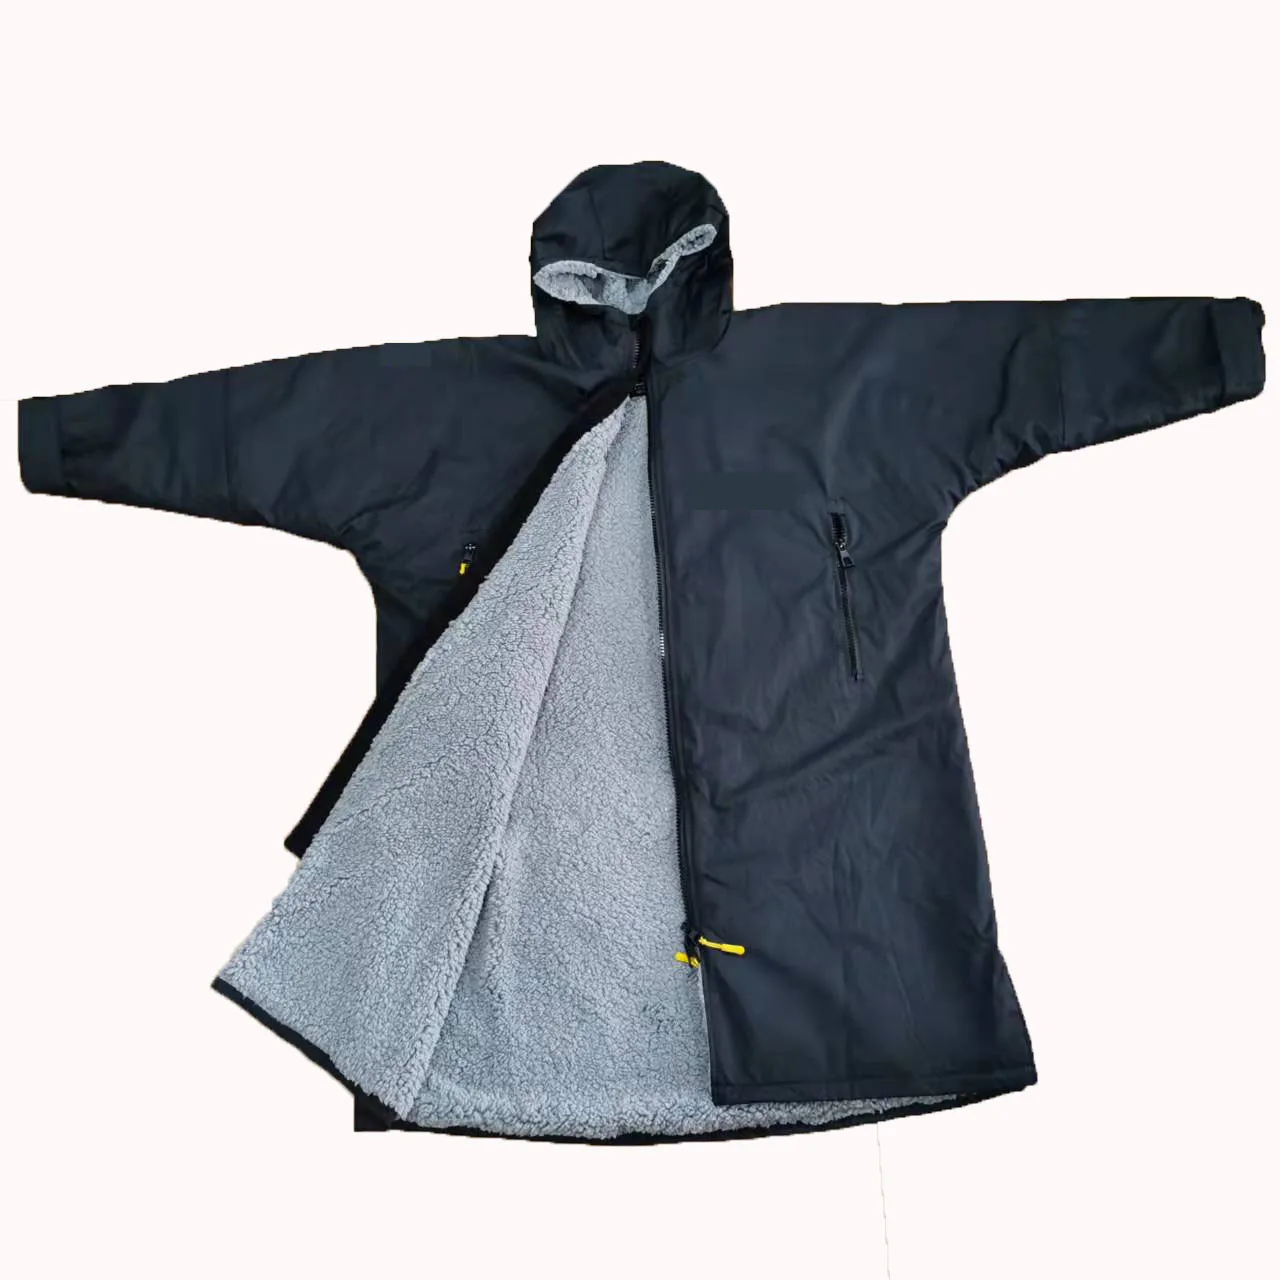 Waterproof Poncho adult beach robe poncho with cotton towel lining logo embroidery surf hooded waterproof changing coat